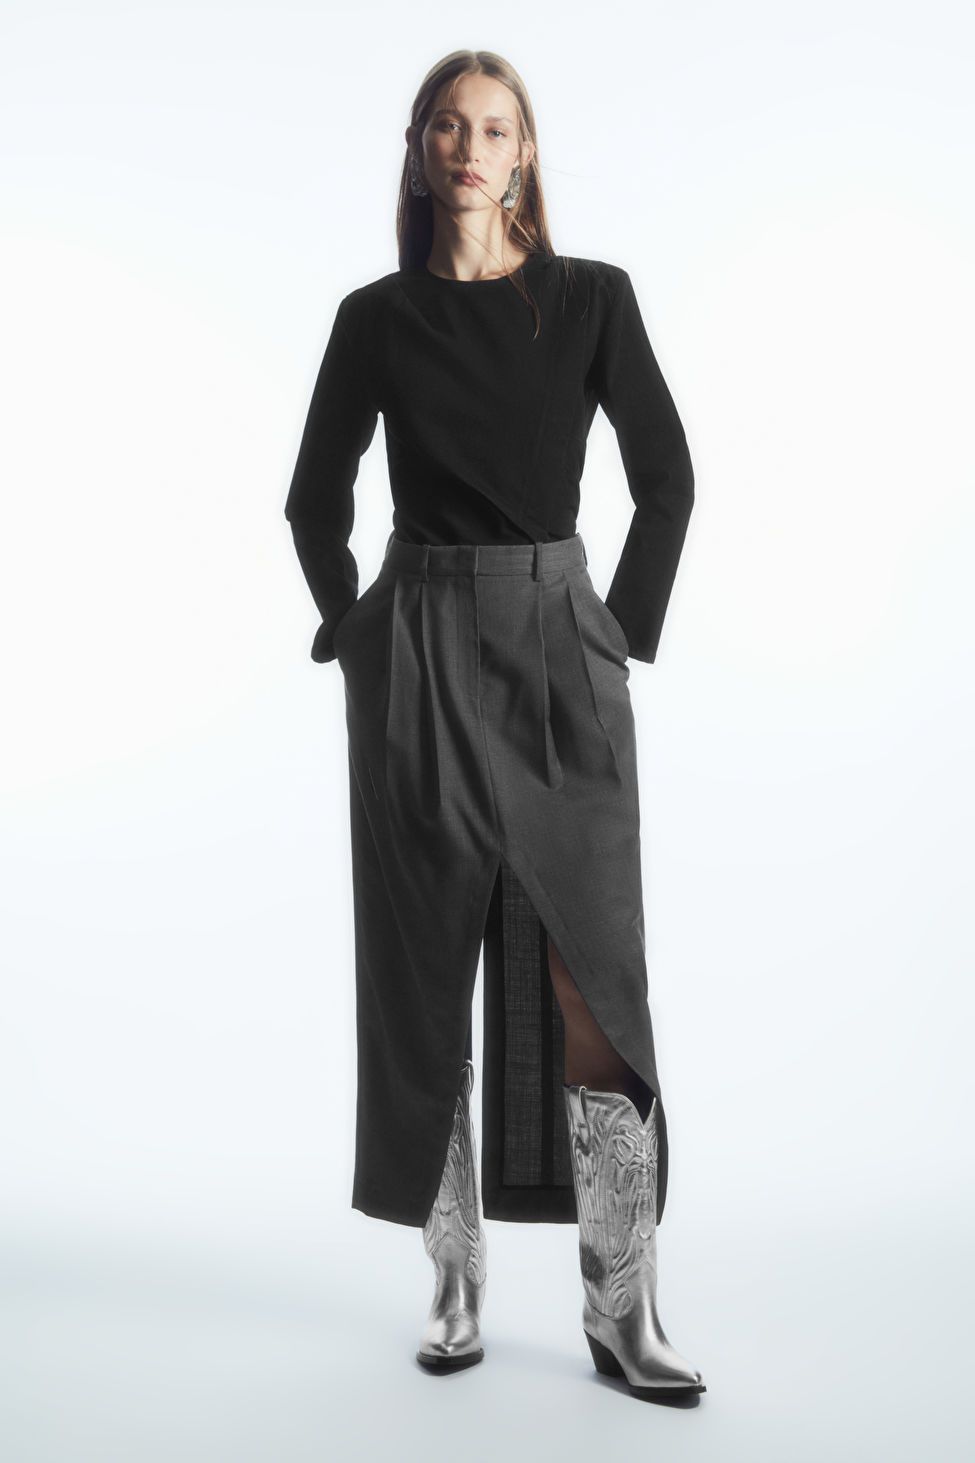 DECONSTRUCTED WOOL PENCIL SKIRT - DARK GRAY - Skirts - COS | COS (US)